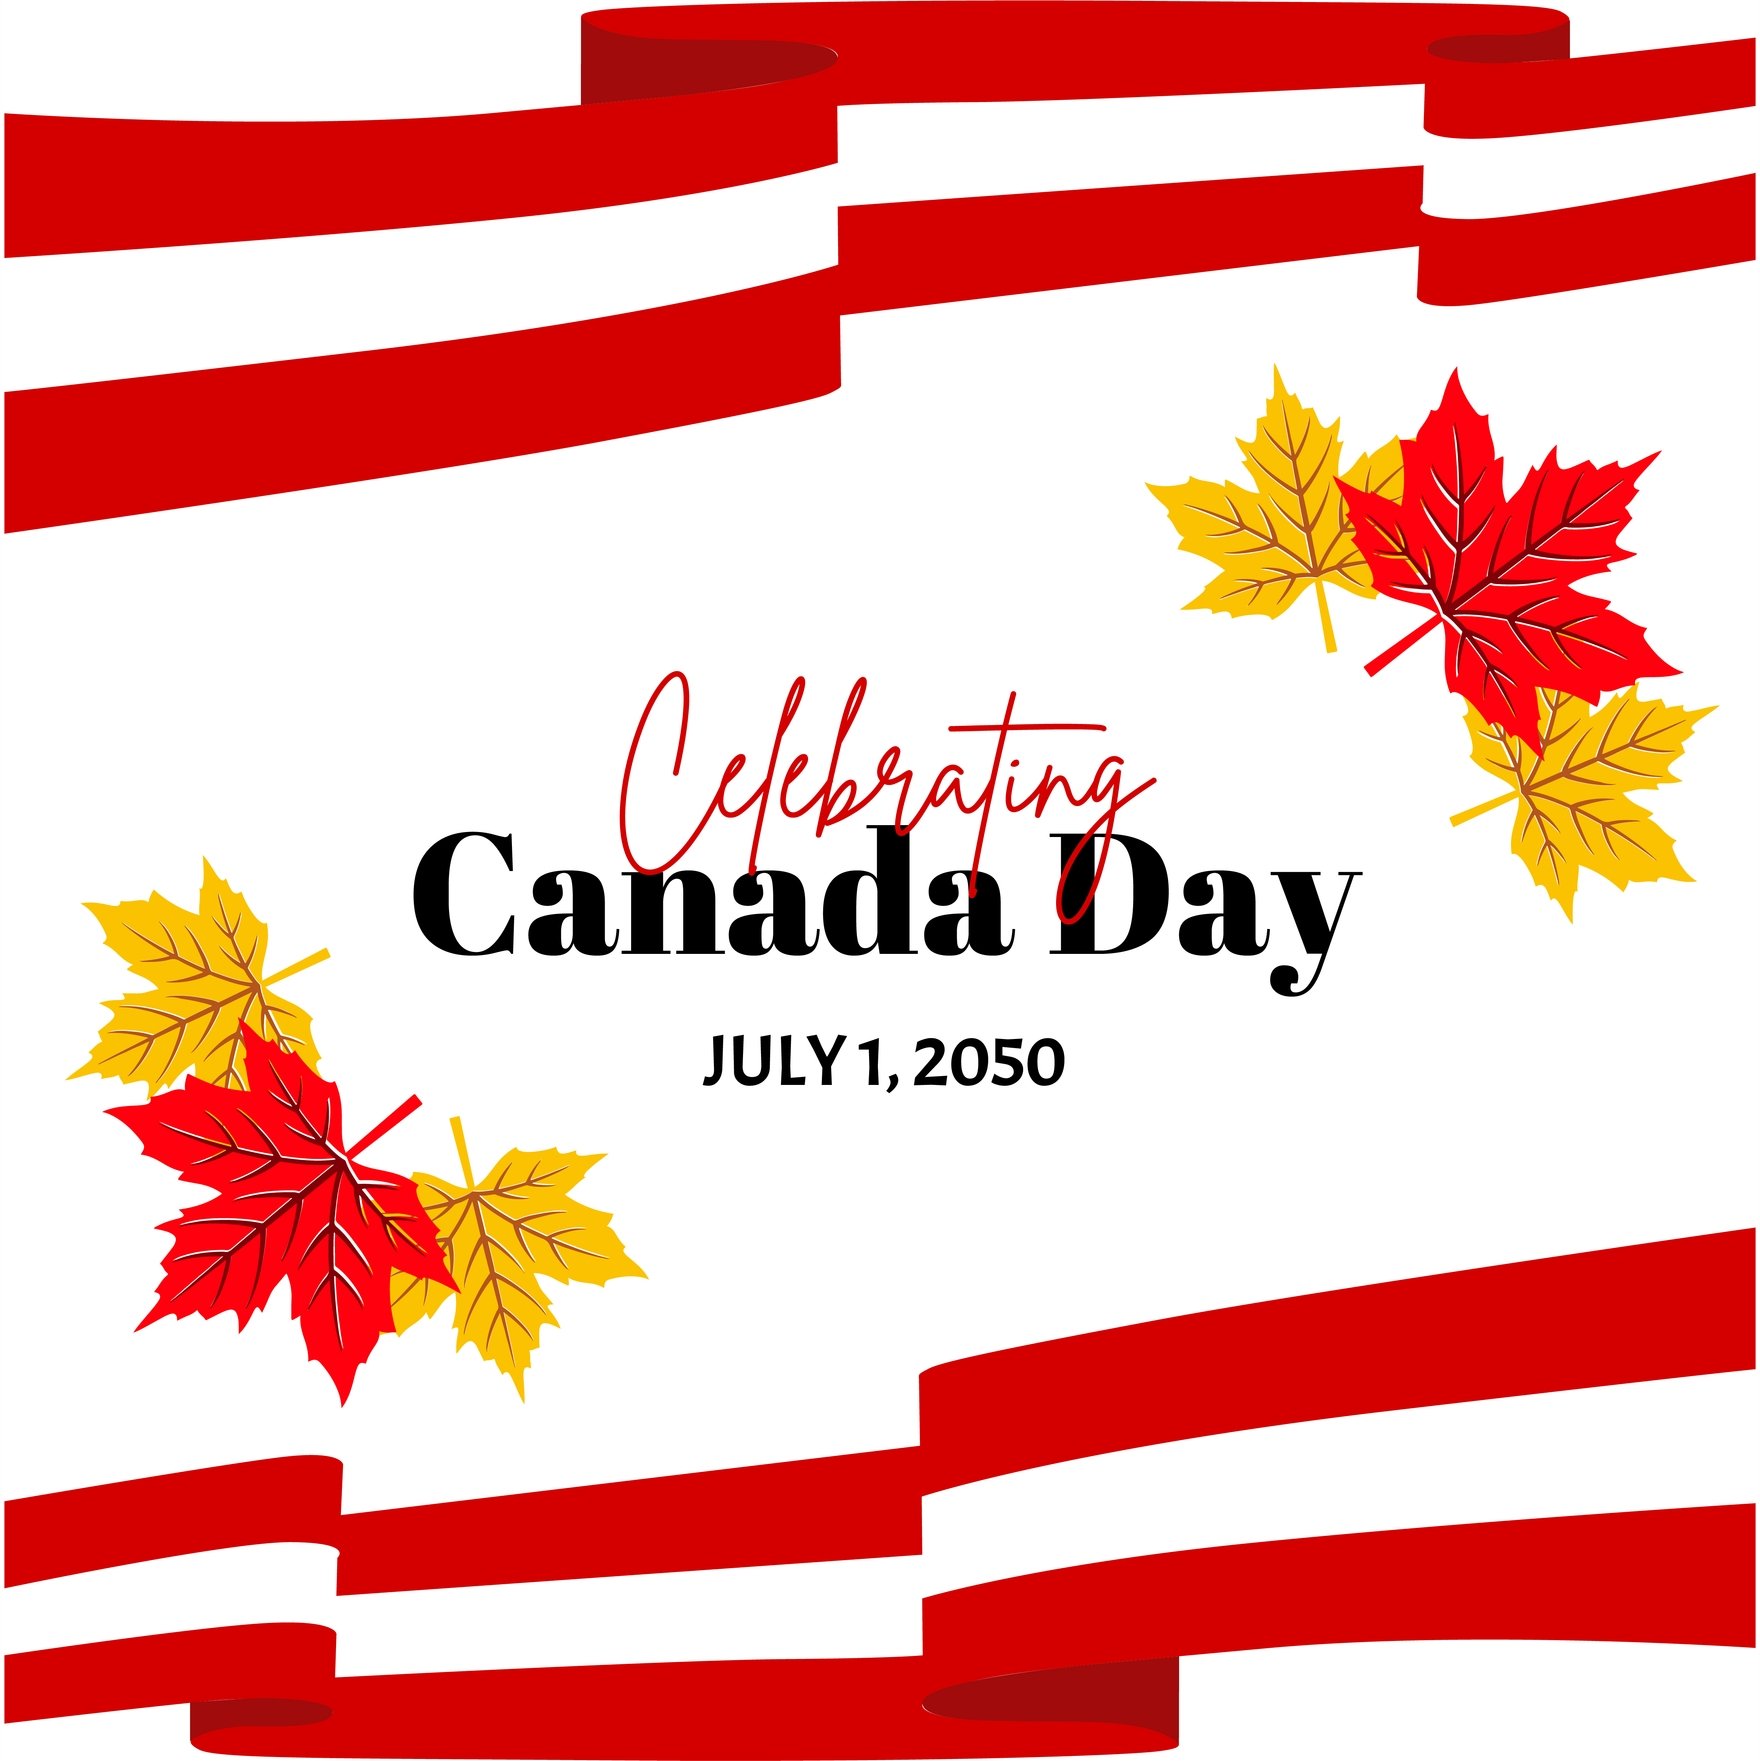 Canada Day Poster Vector